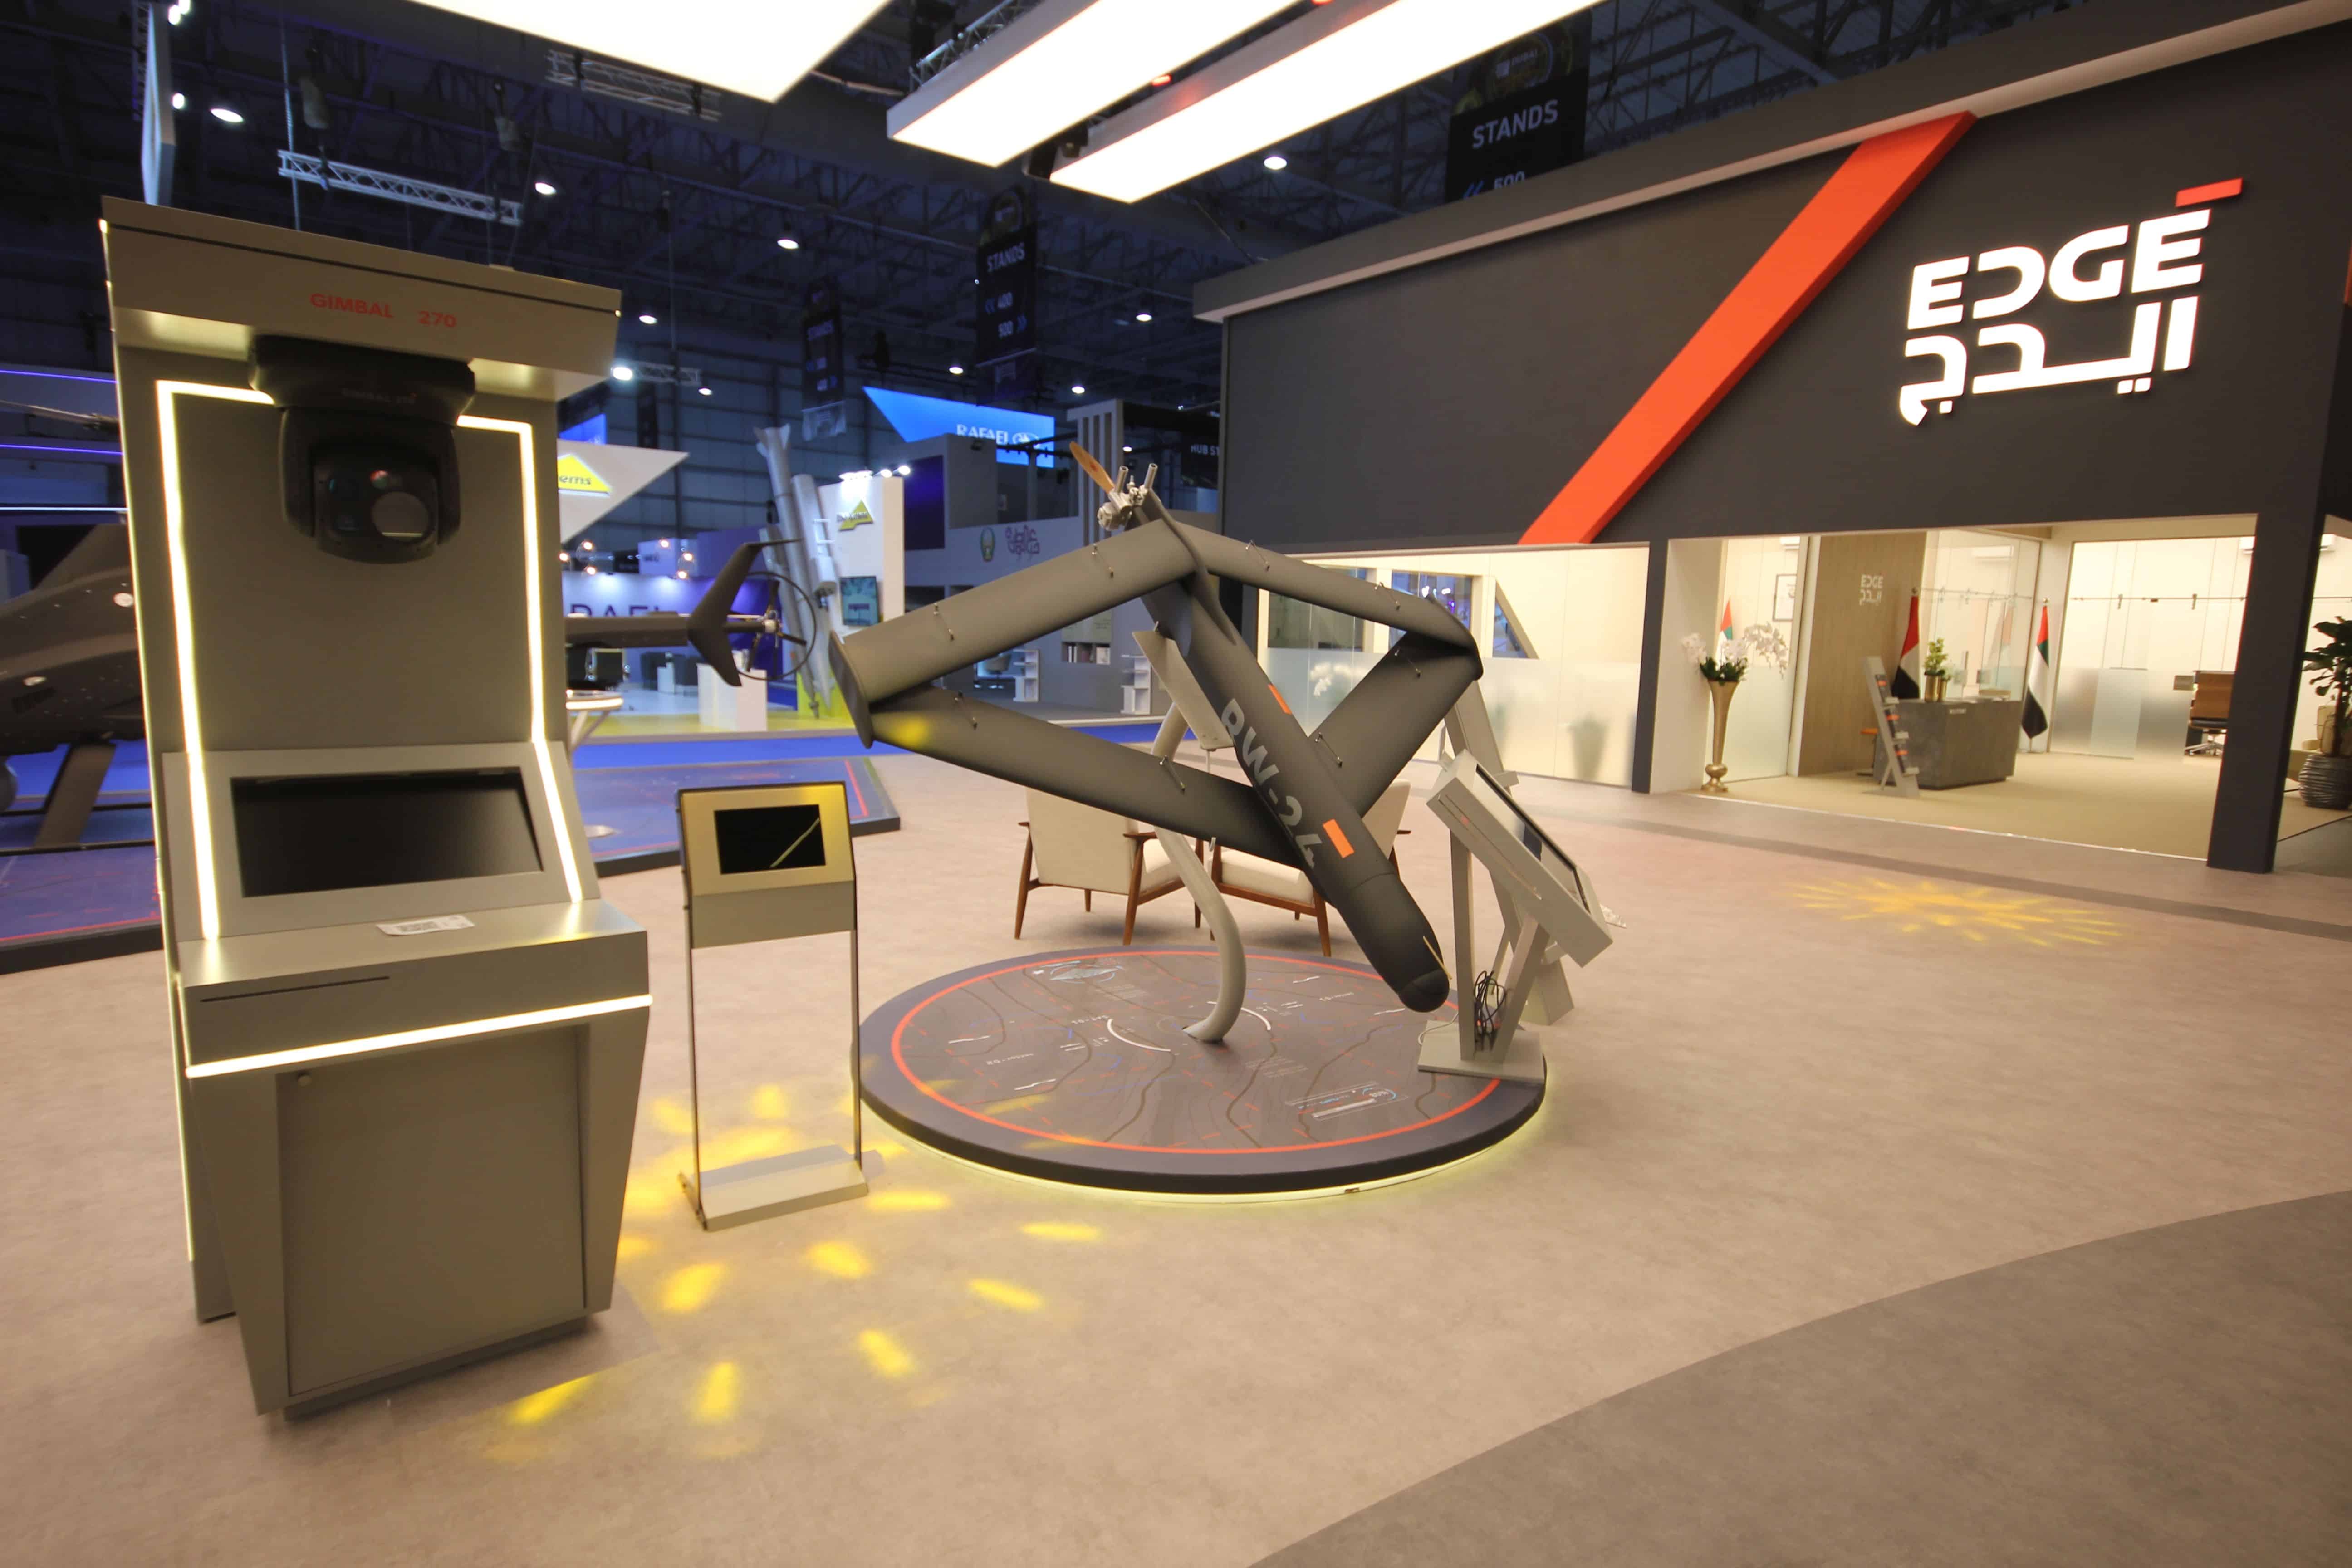 Dubai, UAE - November 14, 2021: EDGE advanced defense and military technology group's pavilion at Dubai Airshow 2021 exhibiting the Emirati company's latest products - from missiles to cyber defense.